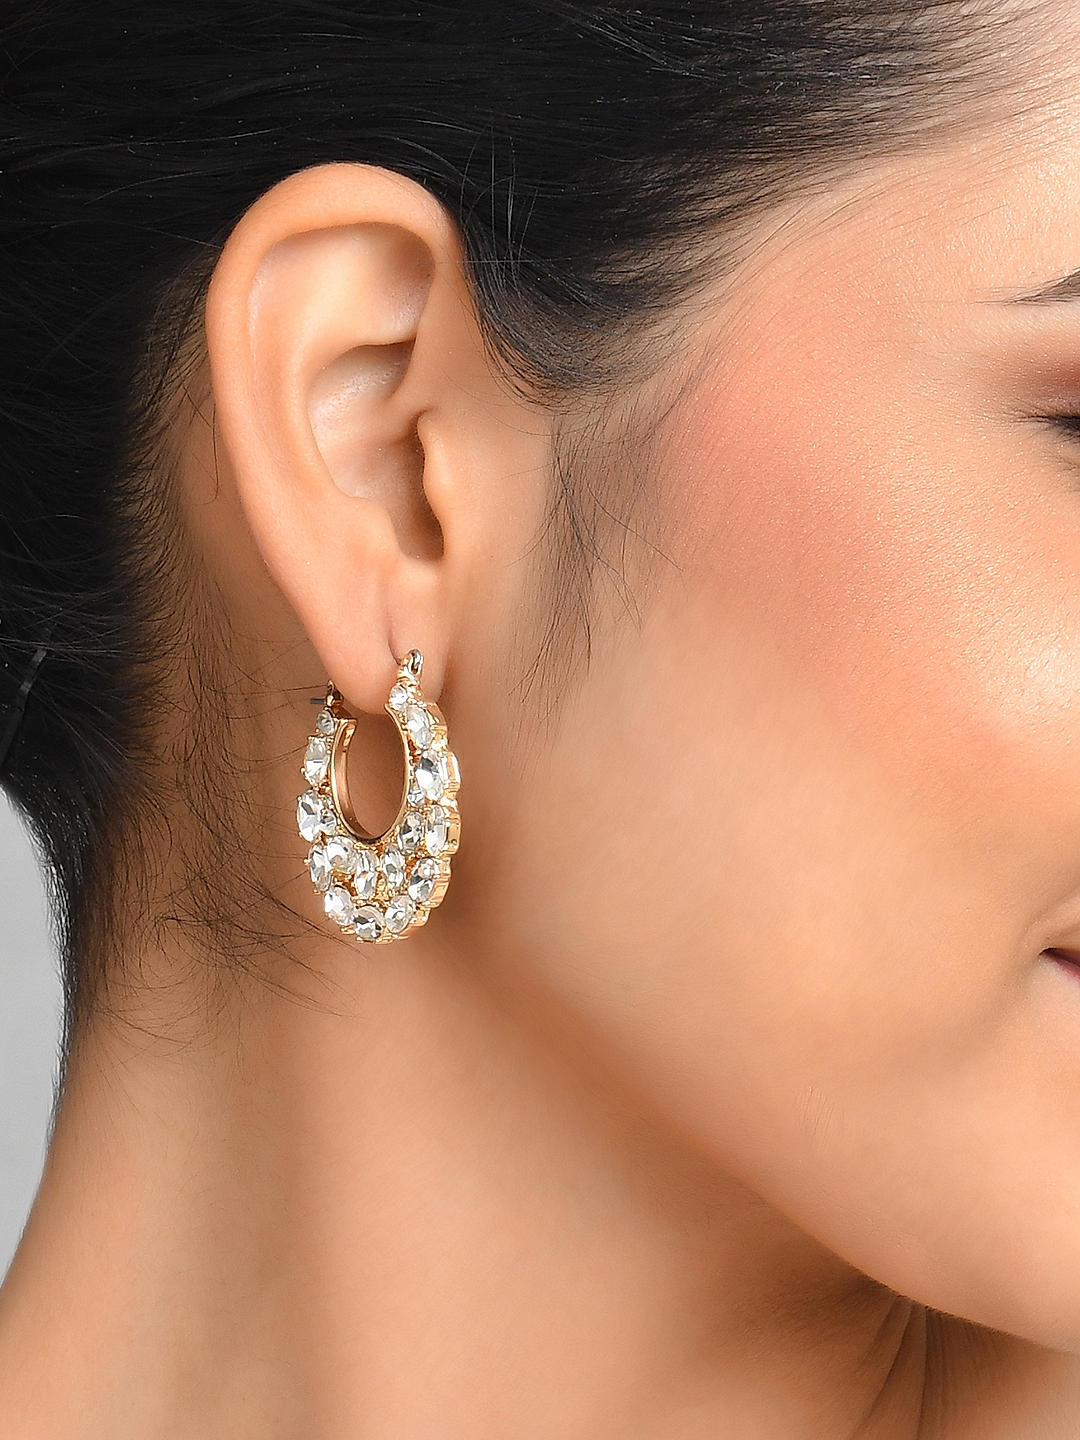 OOMPH Jewellery Silver Stone Studded Large Hoop Earrings For Women  Girls  Buy OOMPH Jewellery Silver Stone Studded Large Hoop Earrings For Women   Girls Online at Best Price in India 